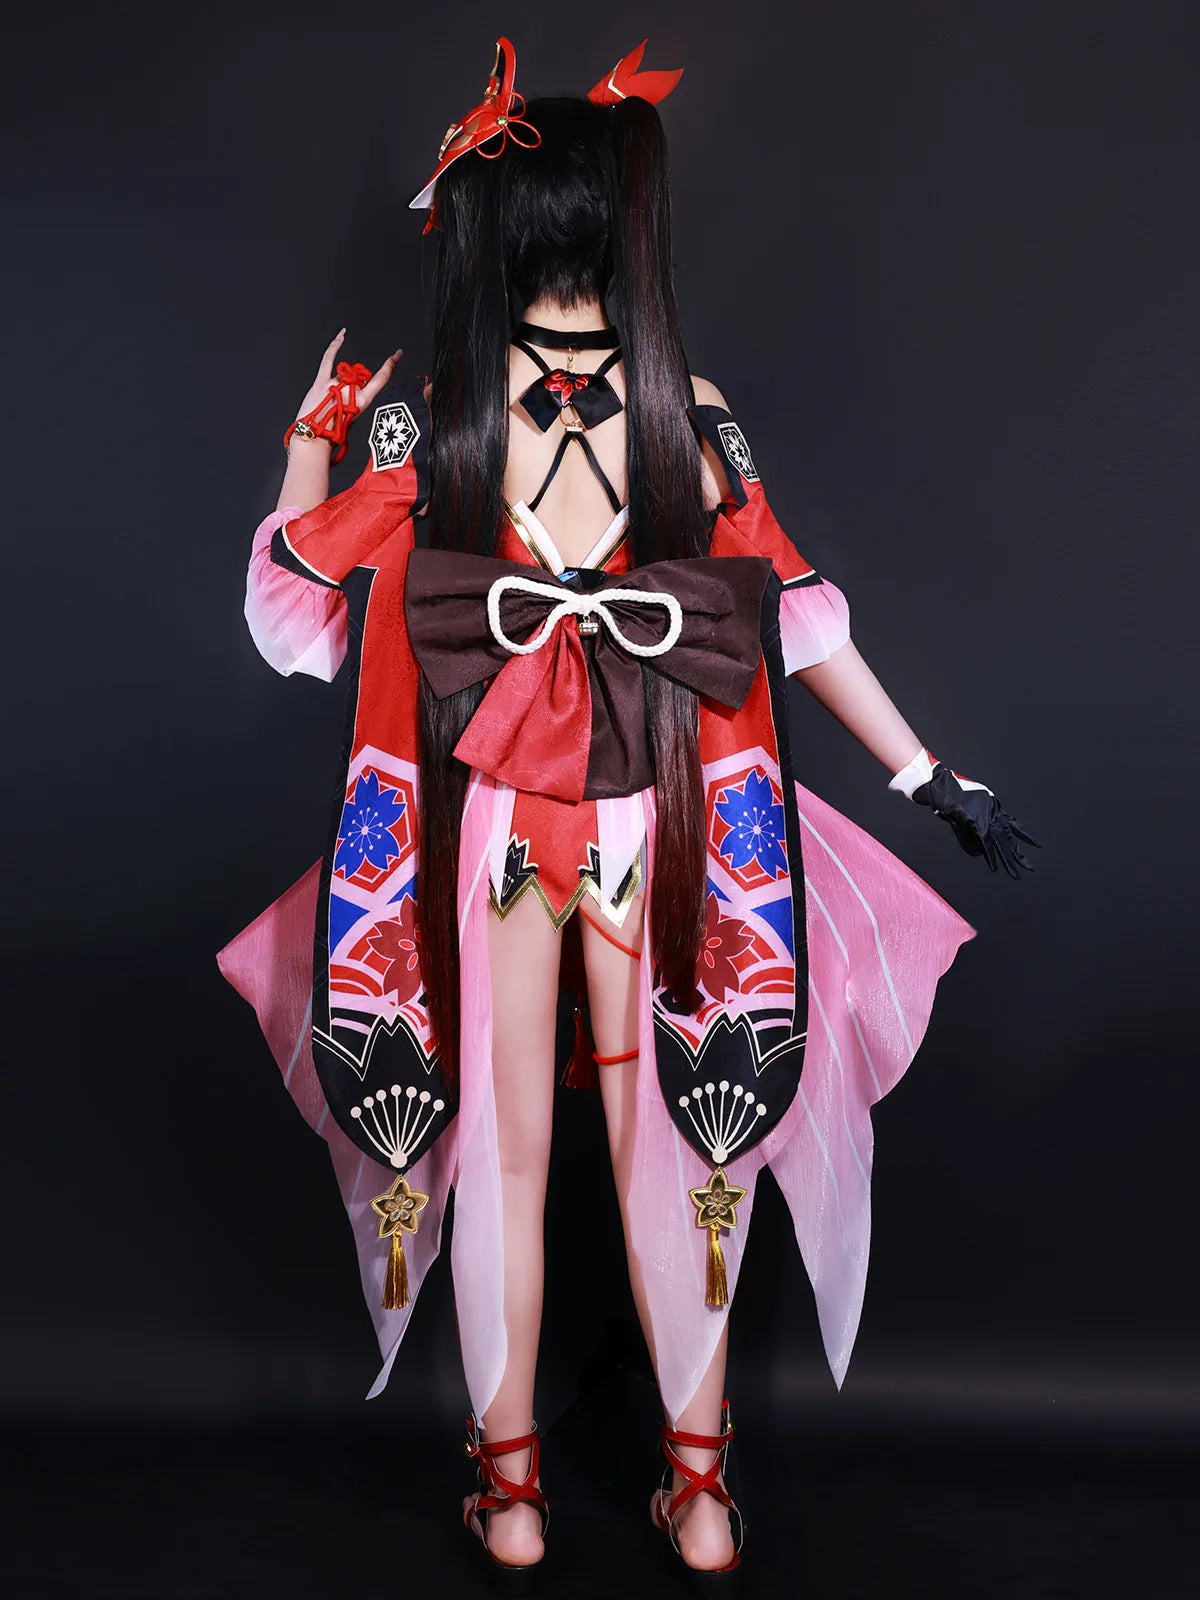 Honkai Star Rail Sparkle Cosplay Costume - Kawaii Stop - Convention, Cosplay, Costume, Dresses, Game, Honkai Star Rail, Hubei, Mainland China, Polyester, Sets, Sparkle, Suits, Women